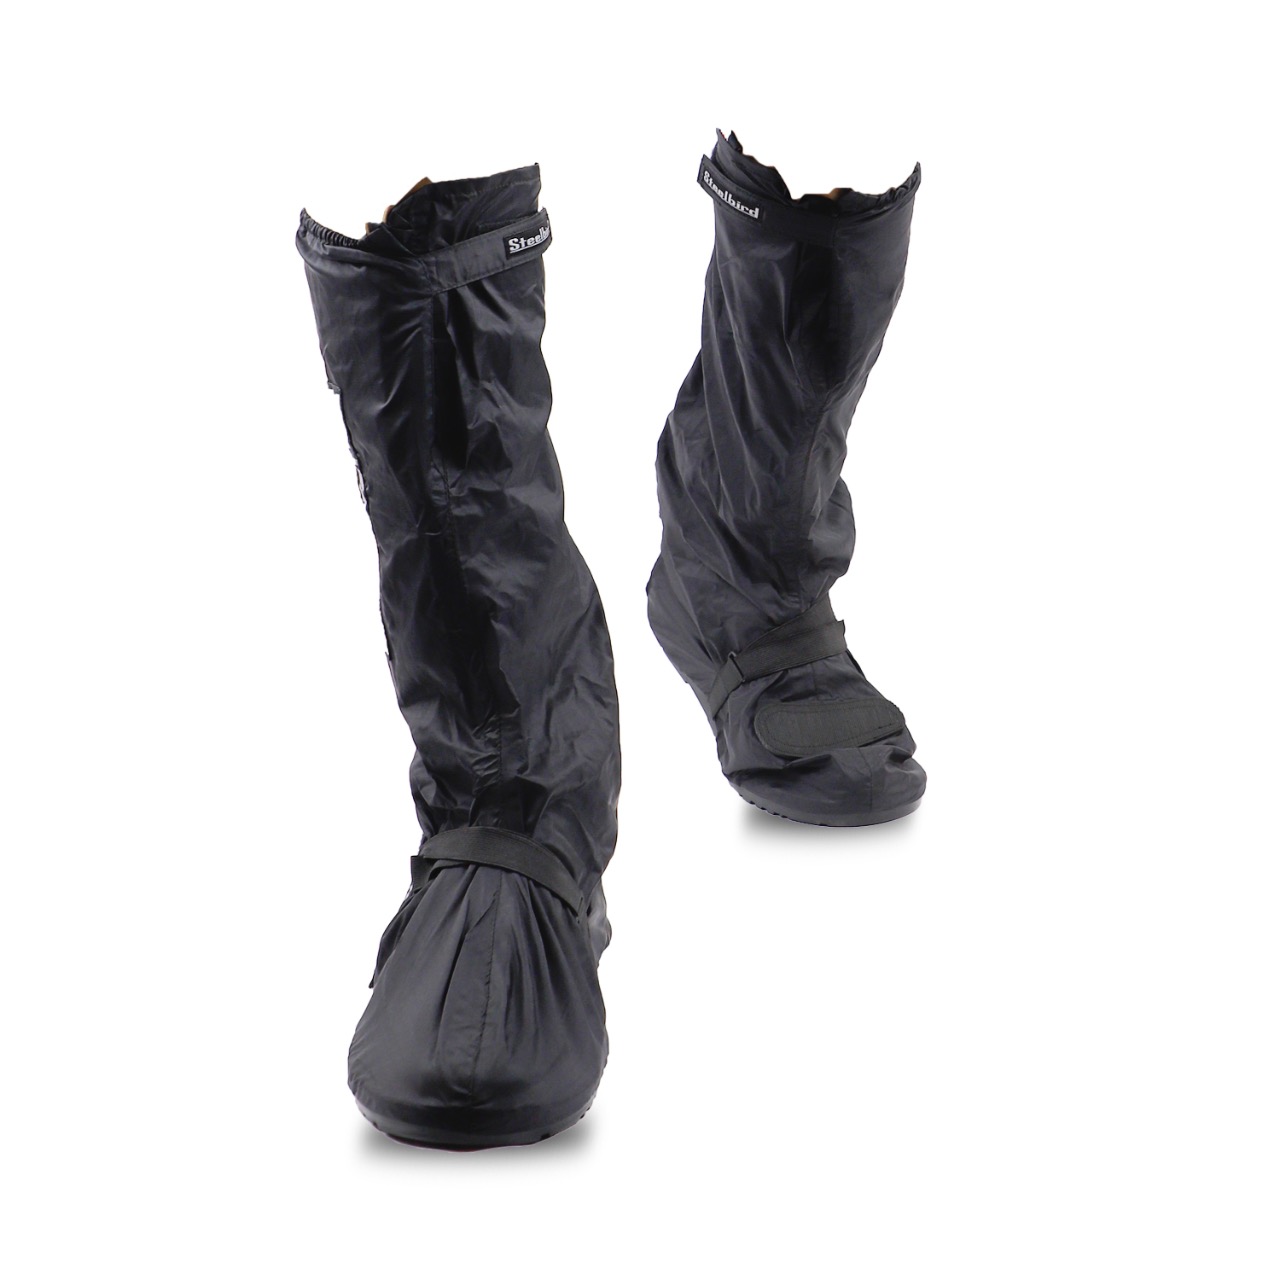 Steelbird Shoe Covers For Rider/Biker Boots With Reflective Piping | Waterproof Rain Shoes Covers Thicker Scootor Non-slip Boots Covers